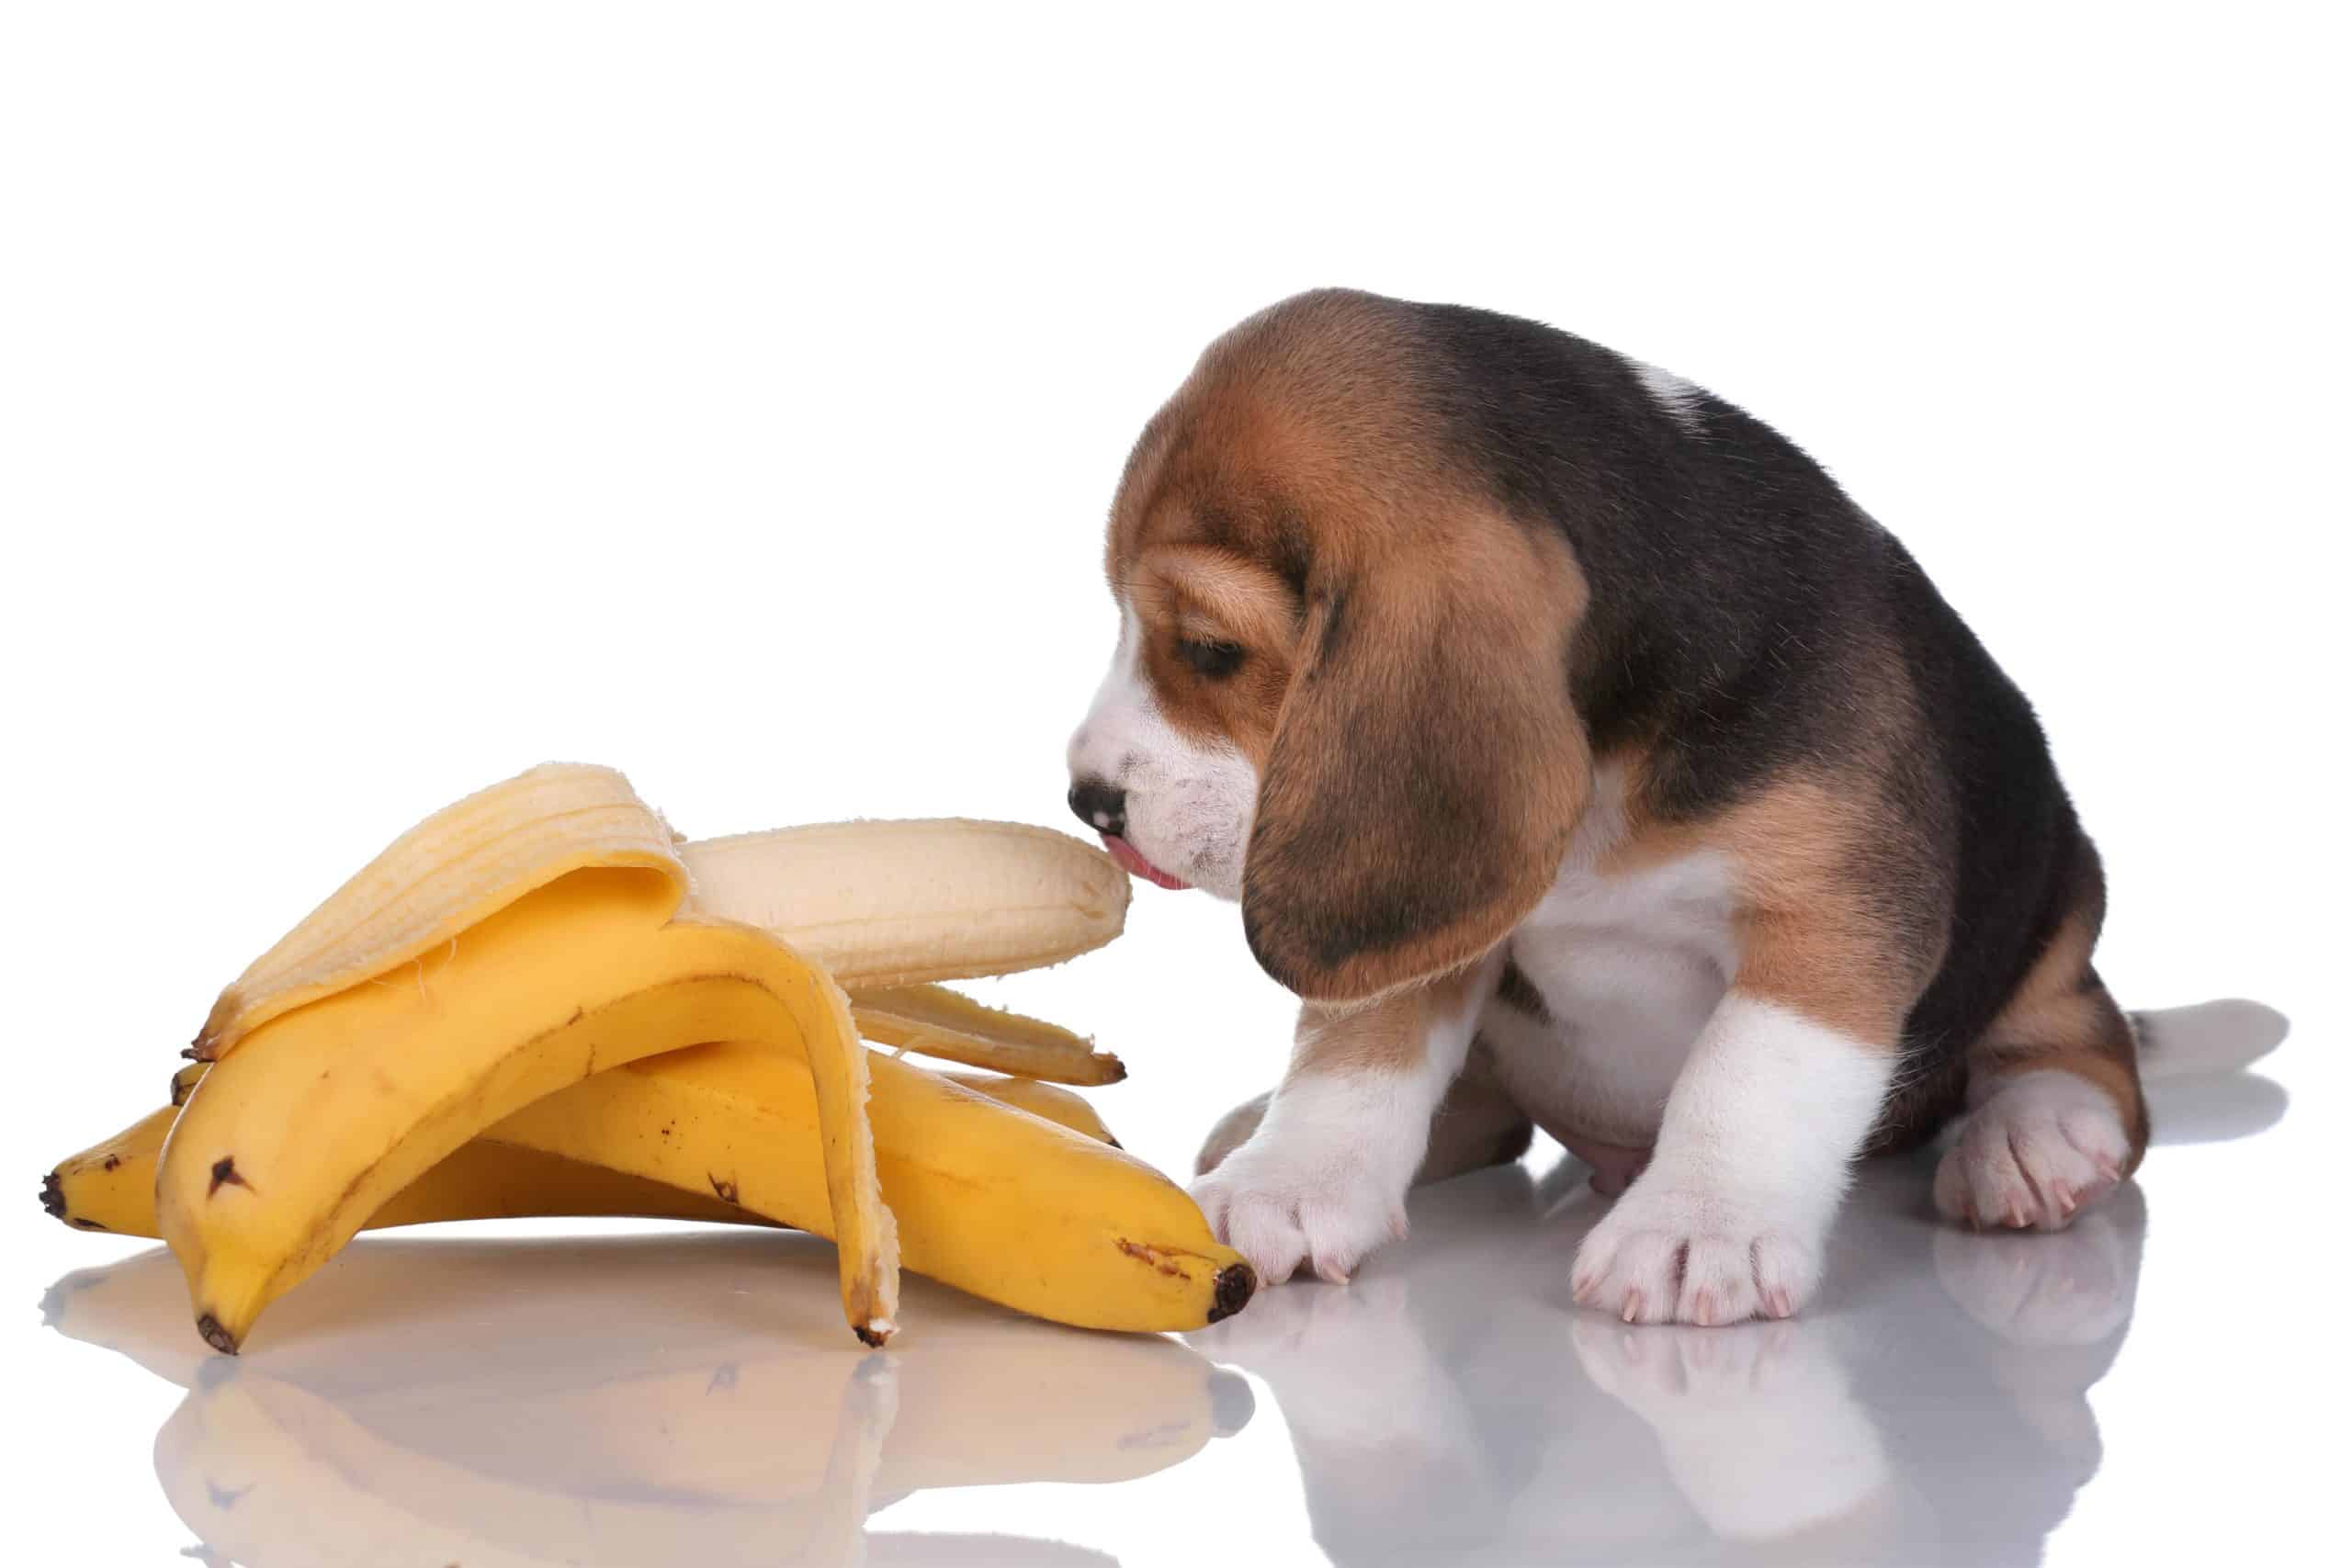 Beagle puppy sniffs banana. When feeding your dog bananas, watch for any signs of an allergic reaction.